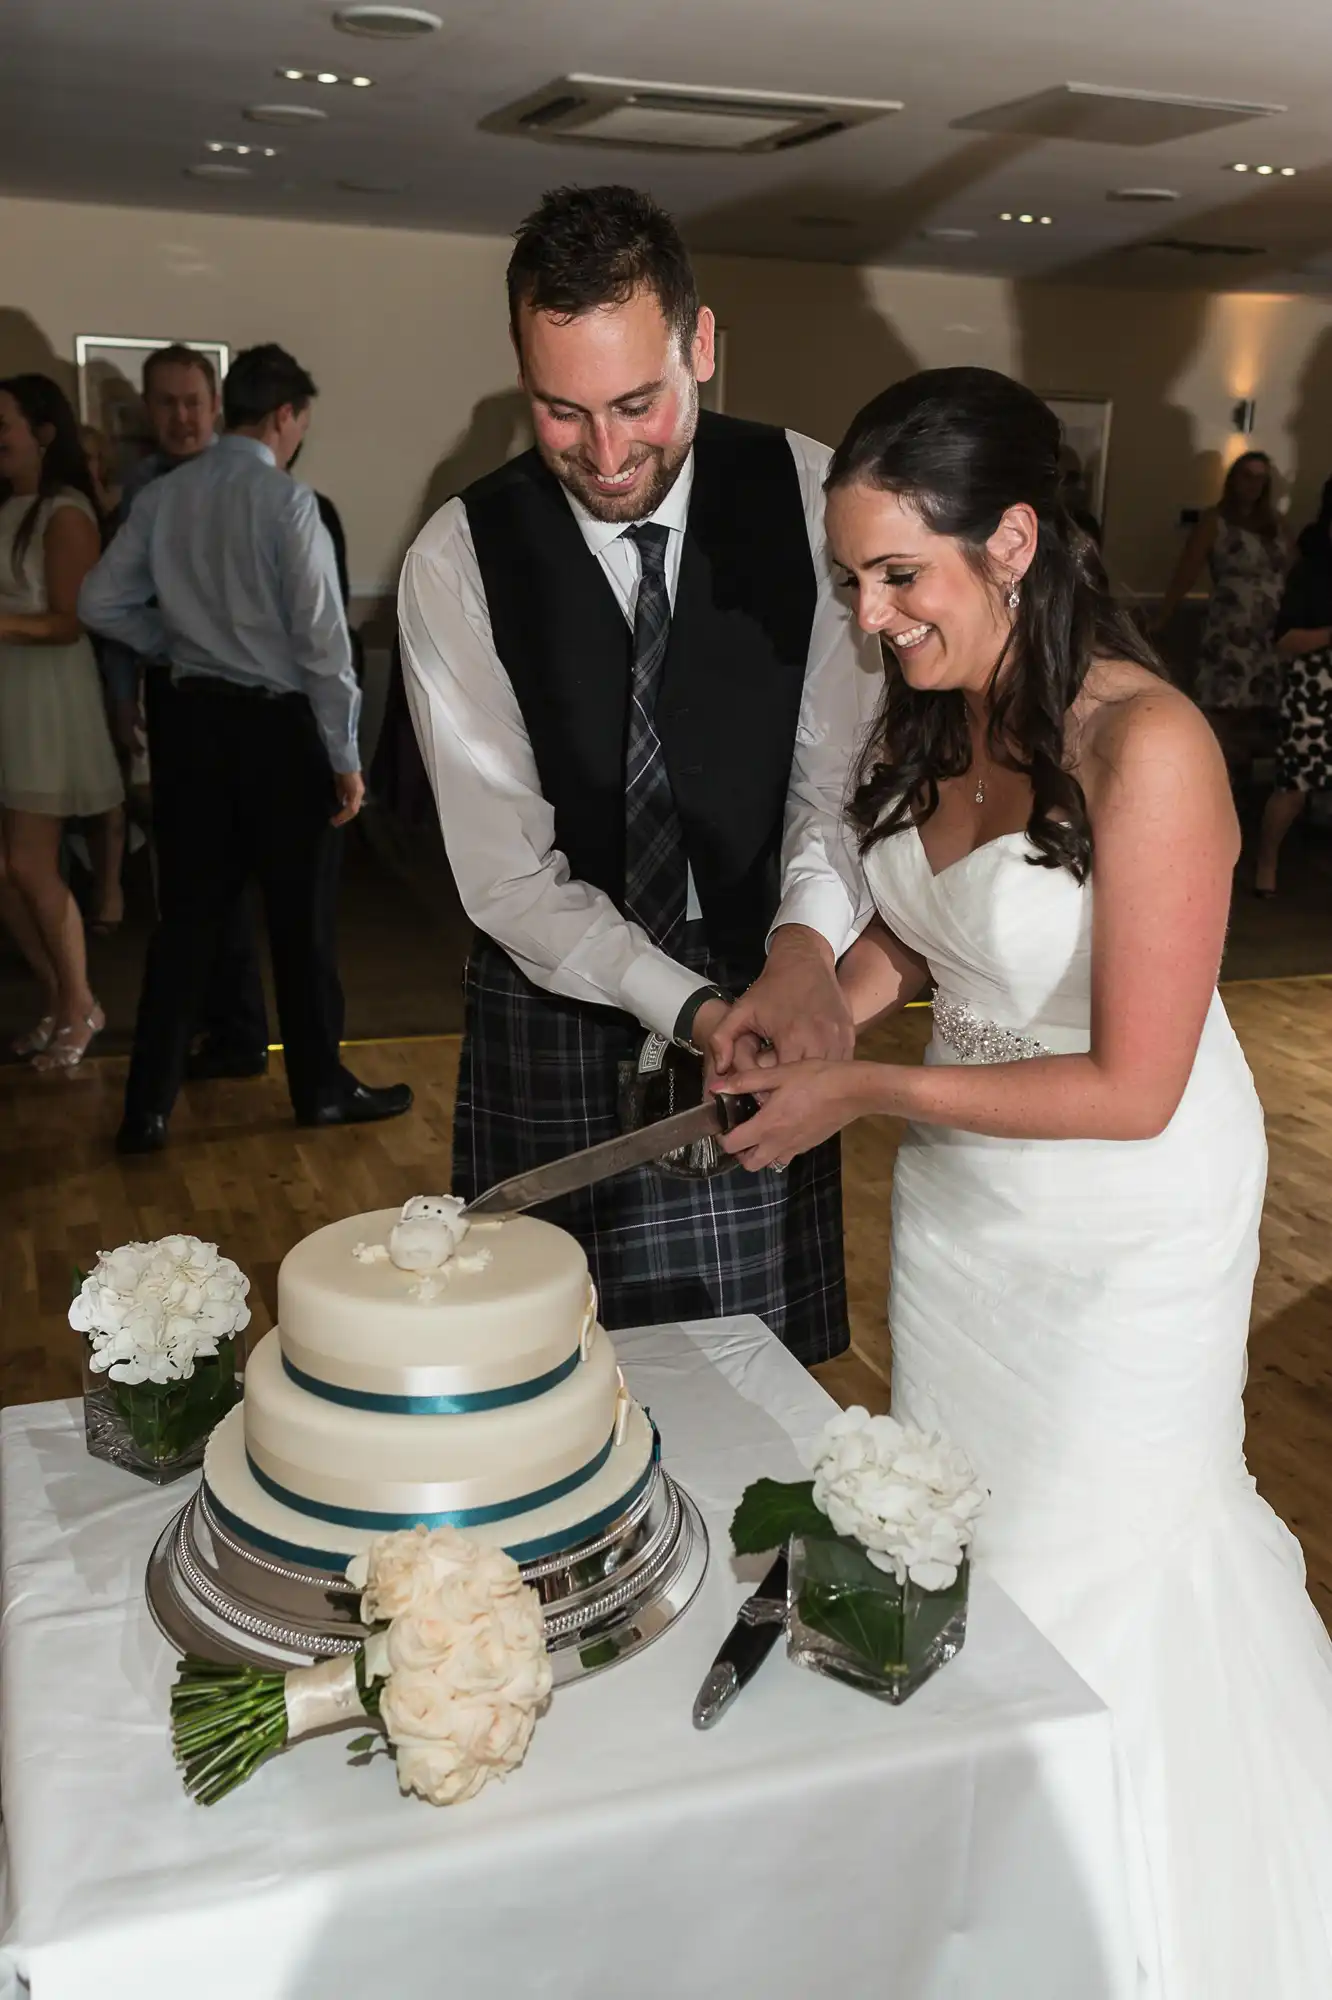 A bride and groom in formal wedding attire smile as they cut a three-tiered cake together at their reception.